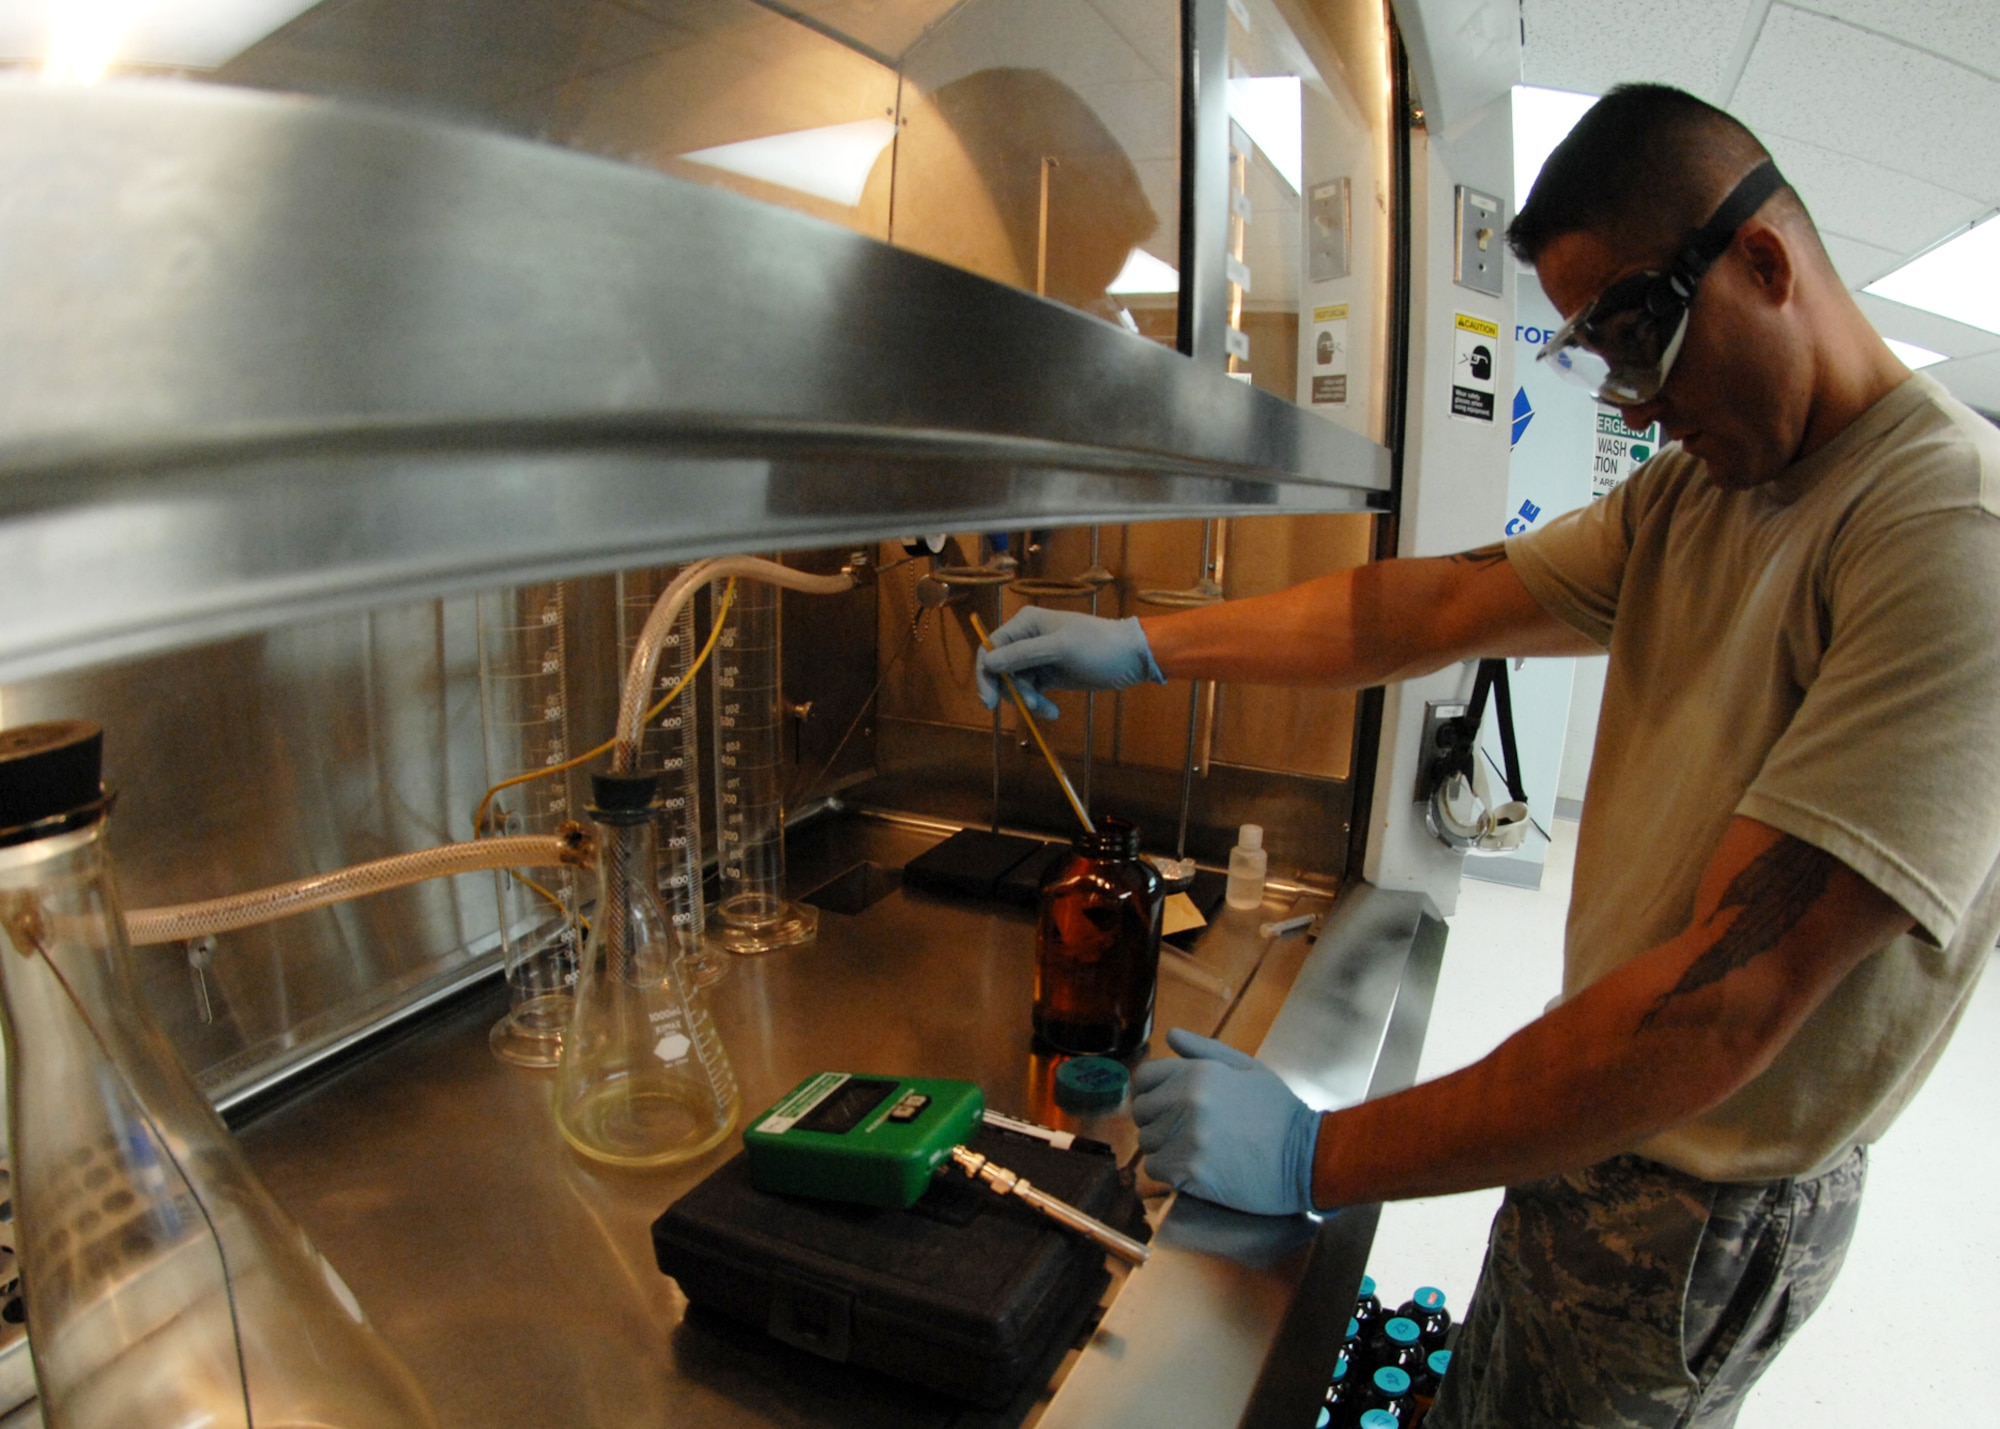 ANDERSEN AIR FORCE BASE, Guam-Tech. Sgt. Dan Rabideau of the 36th Logistics Readiness Squadron Fuels Laboratory, tests samples of jet fuel before allowing the fuel to reach aircraft on the flight line here, July 14. All fuel received is sampled and tested to ensure it meets all standards. (U.S. Air Force by Airman 1st Class Nichelle Griffiths) 
